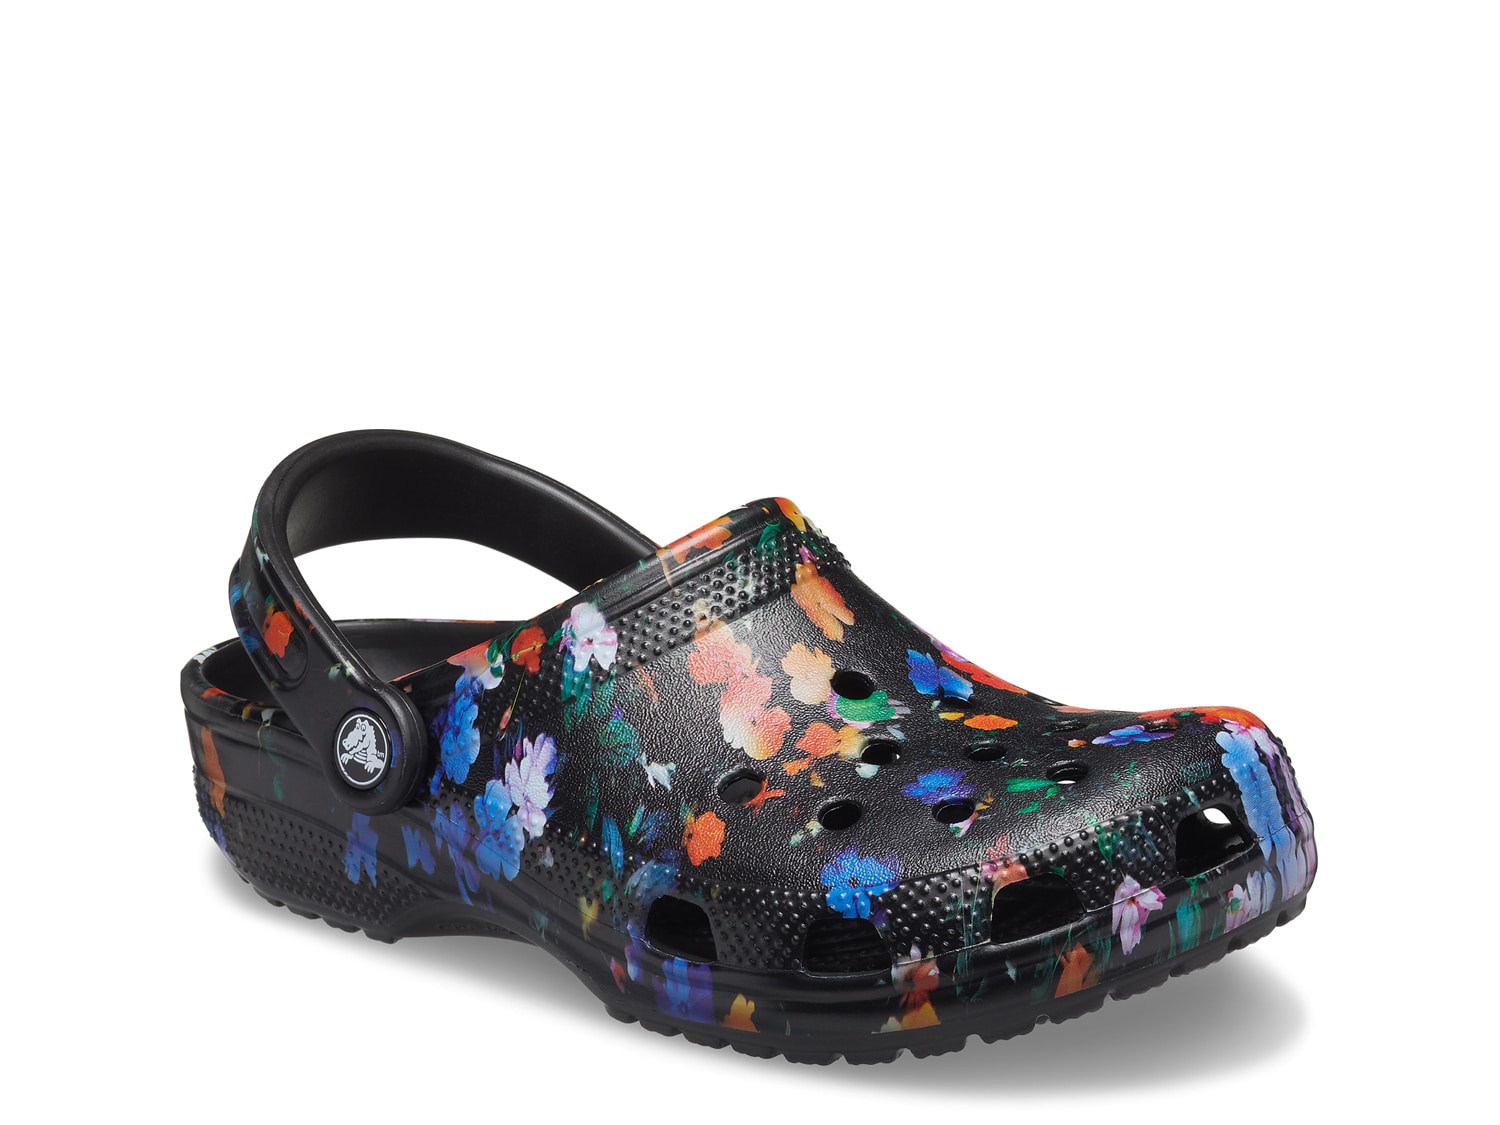 Crocs Classic Floral Clog - Women's - Free Shipping | DSW